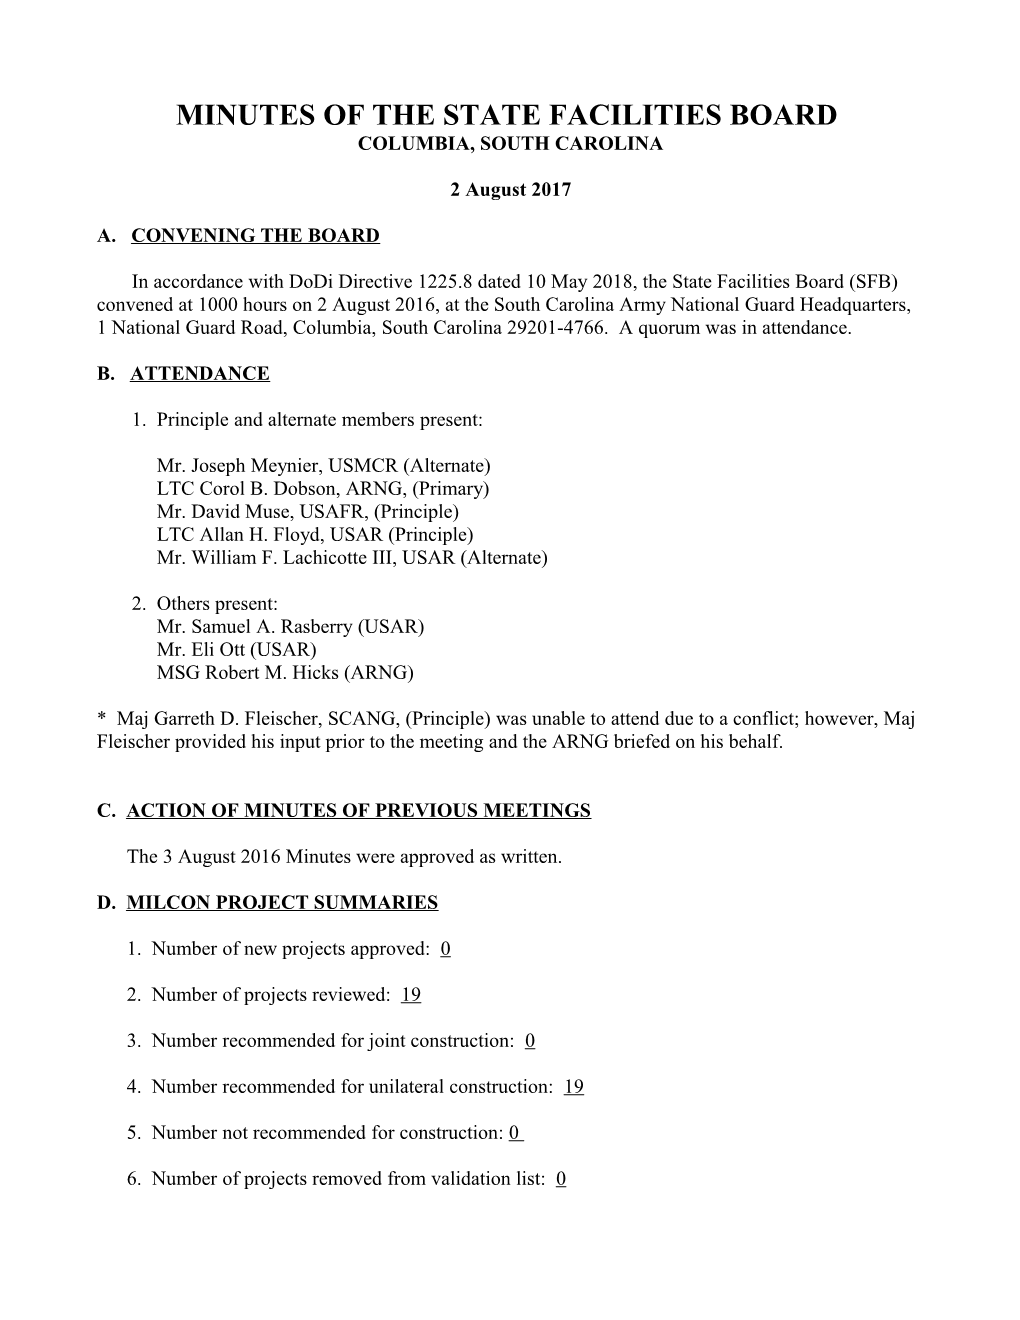 Minutes of the Joint Service Reserve Component Facility Board